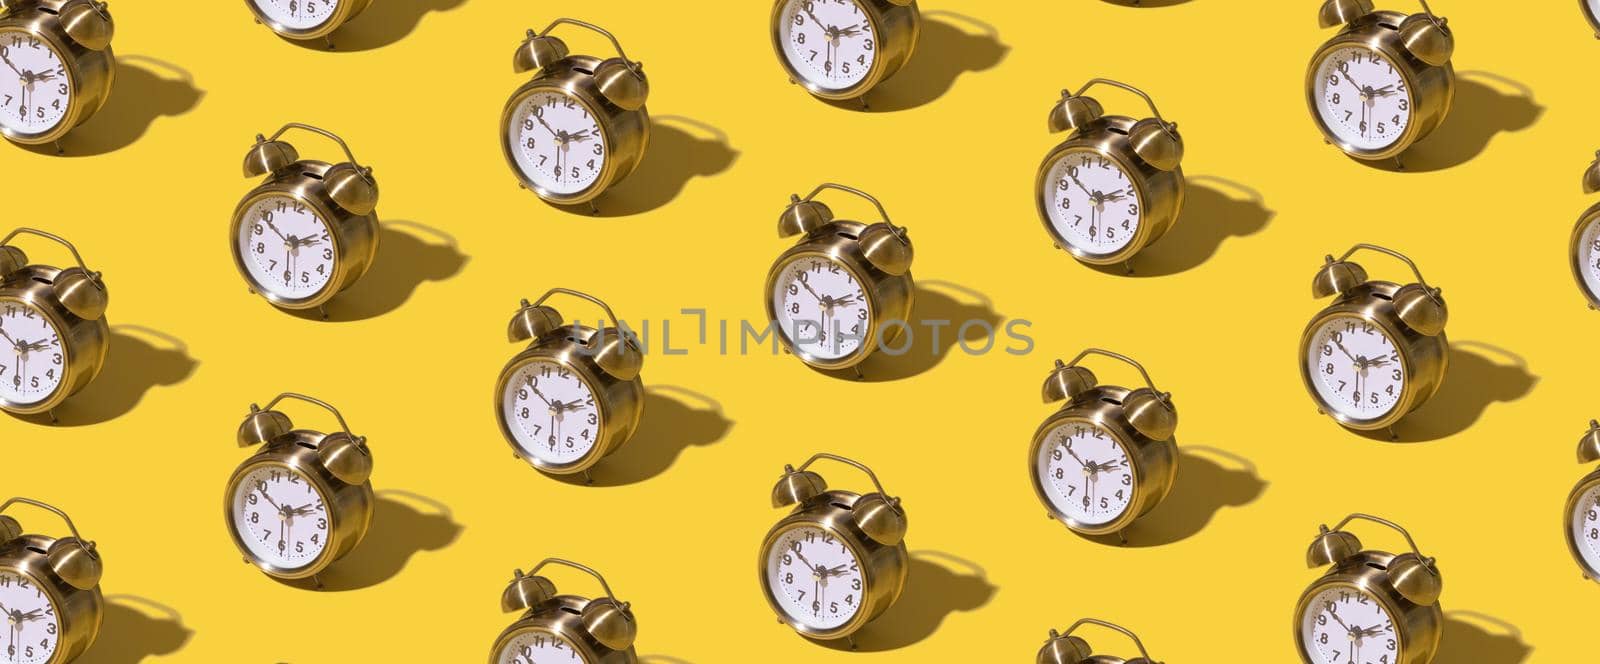 Pattern of an alarm clock on a colored background. Monochrome time concept. Banner format